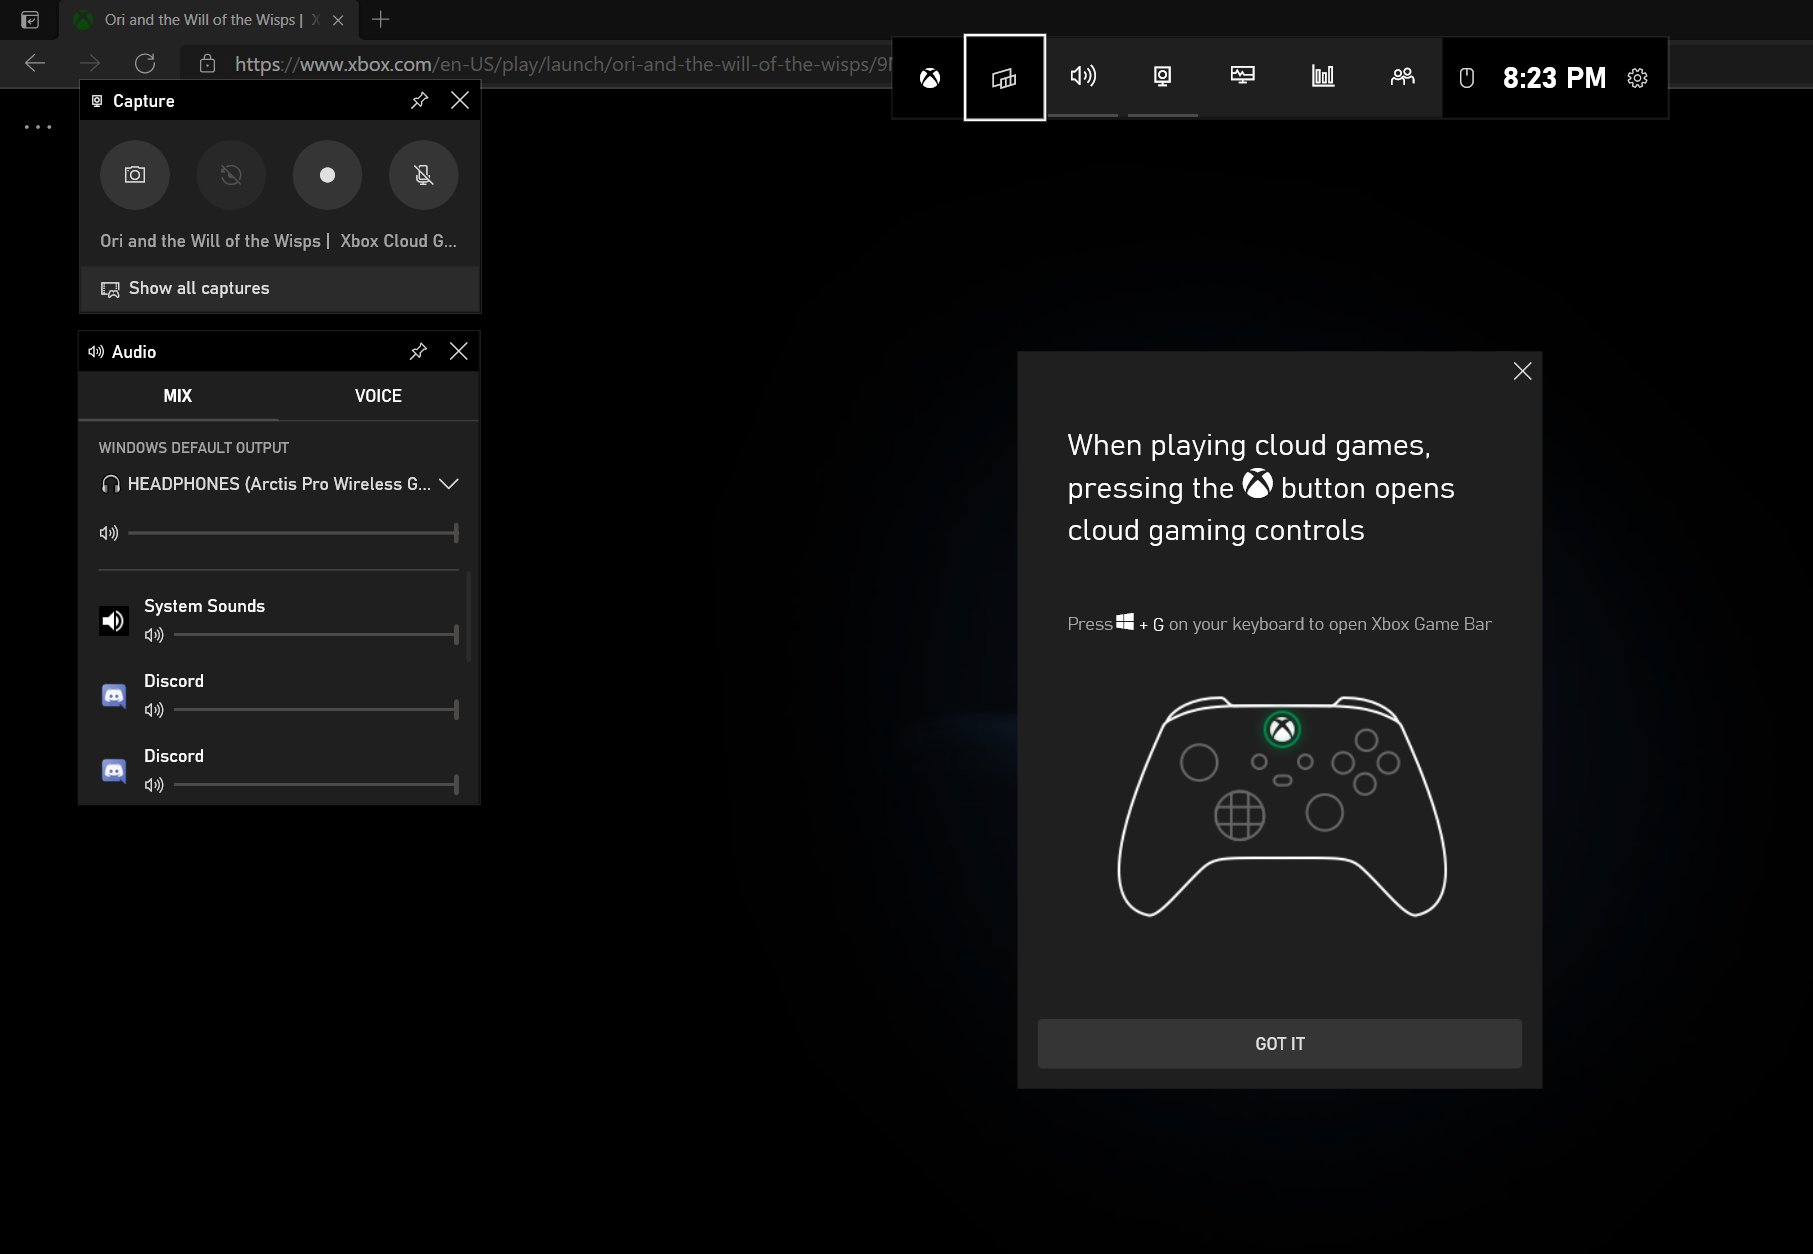 How to Use Xbox Cloud Gaming on Windows 